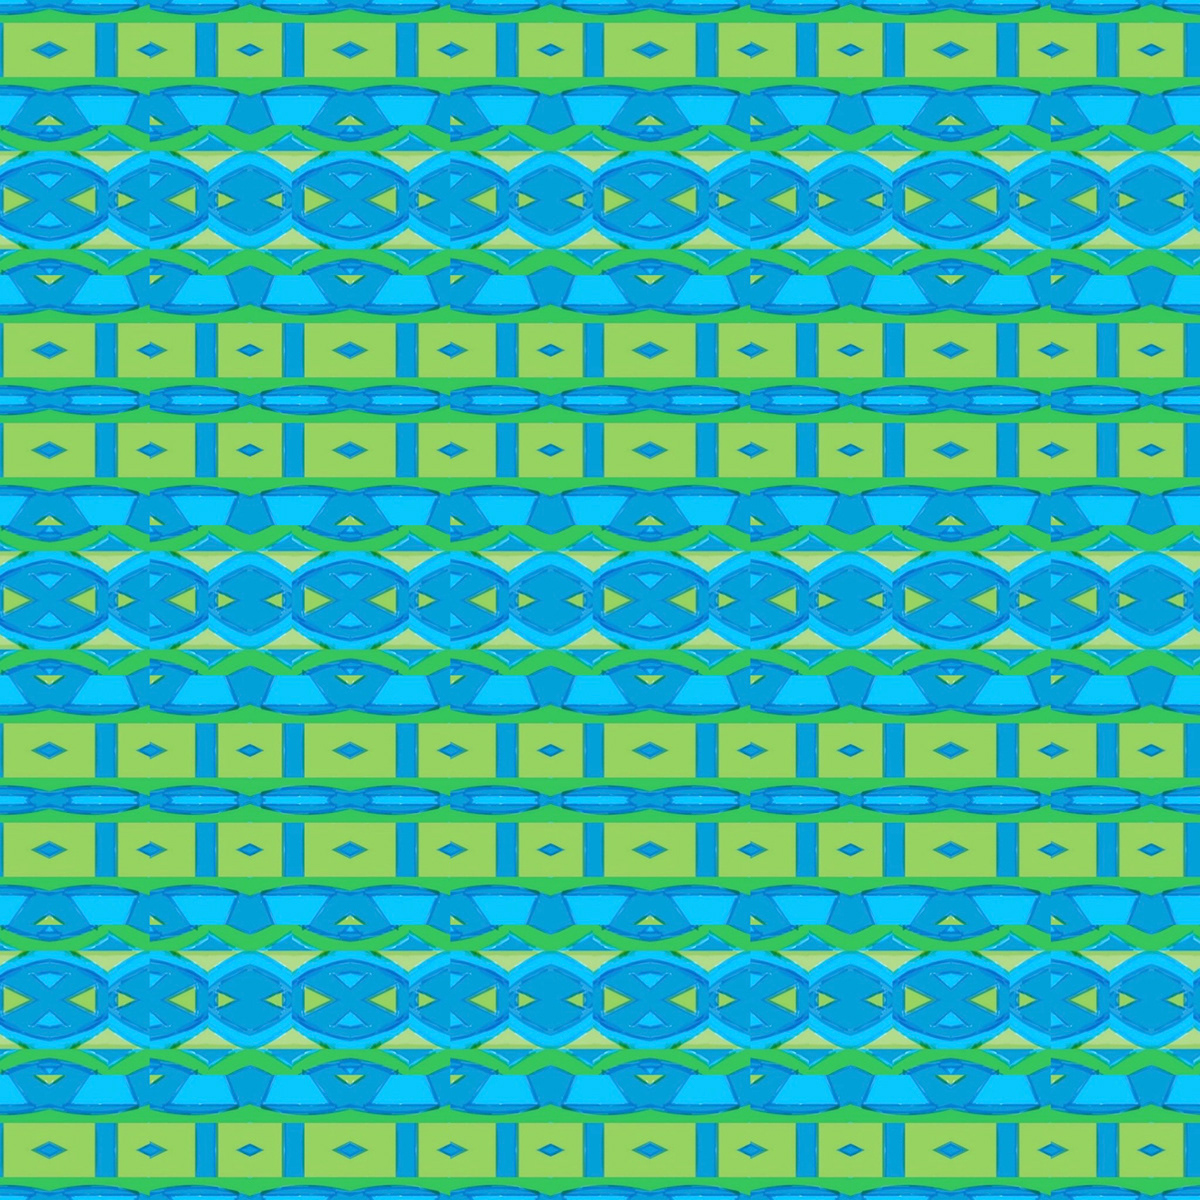 chartreuse iphone paintings Patterns turquoise